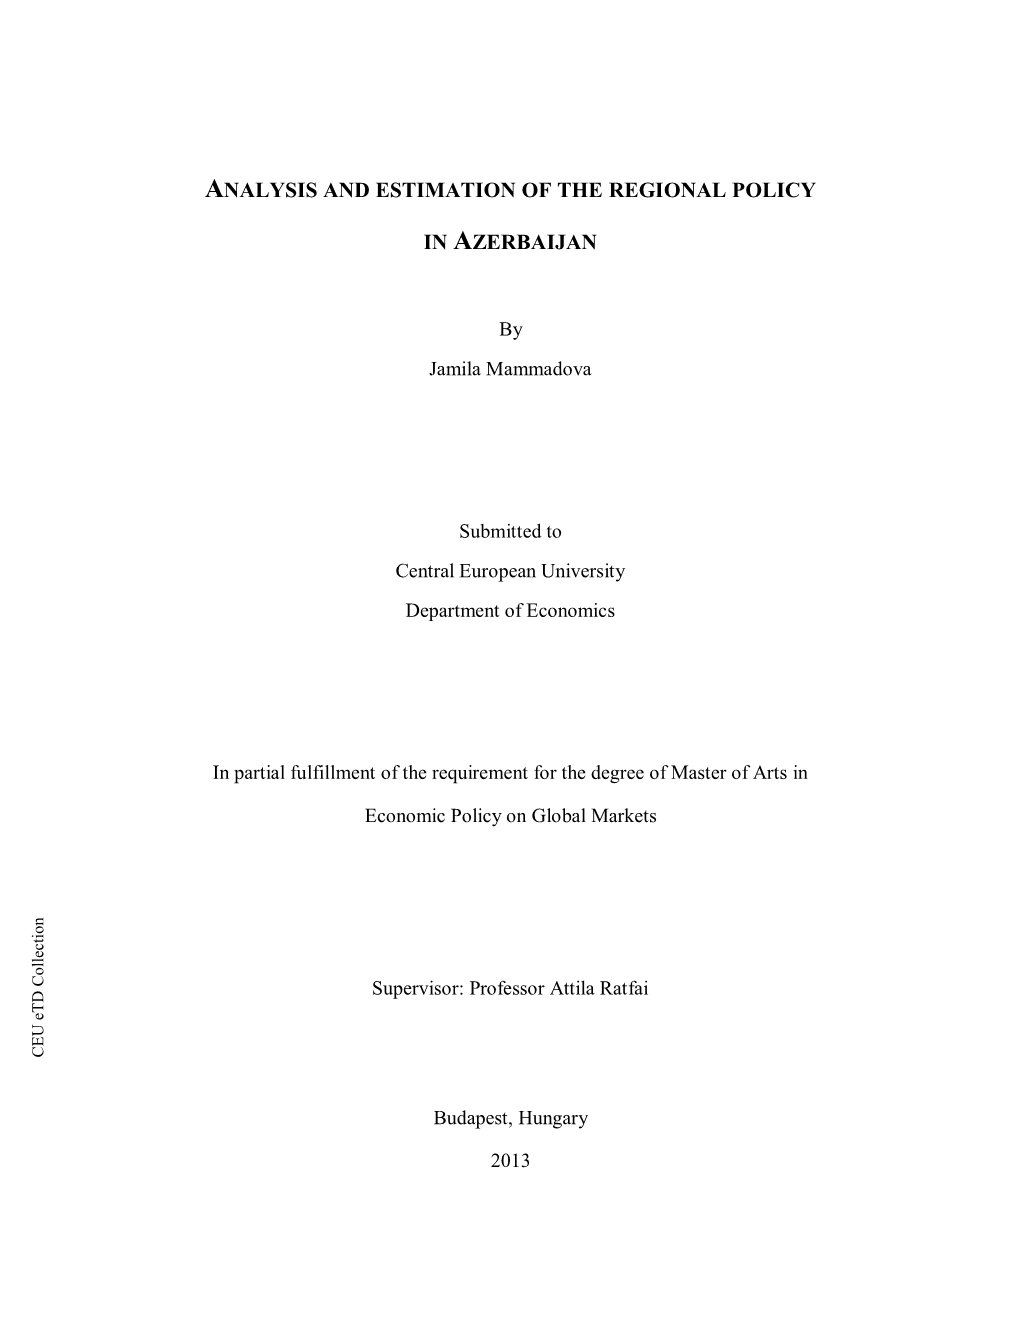 Analysis and Estimation of the Regional Policy in Azerbaijan